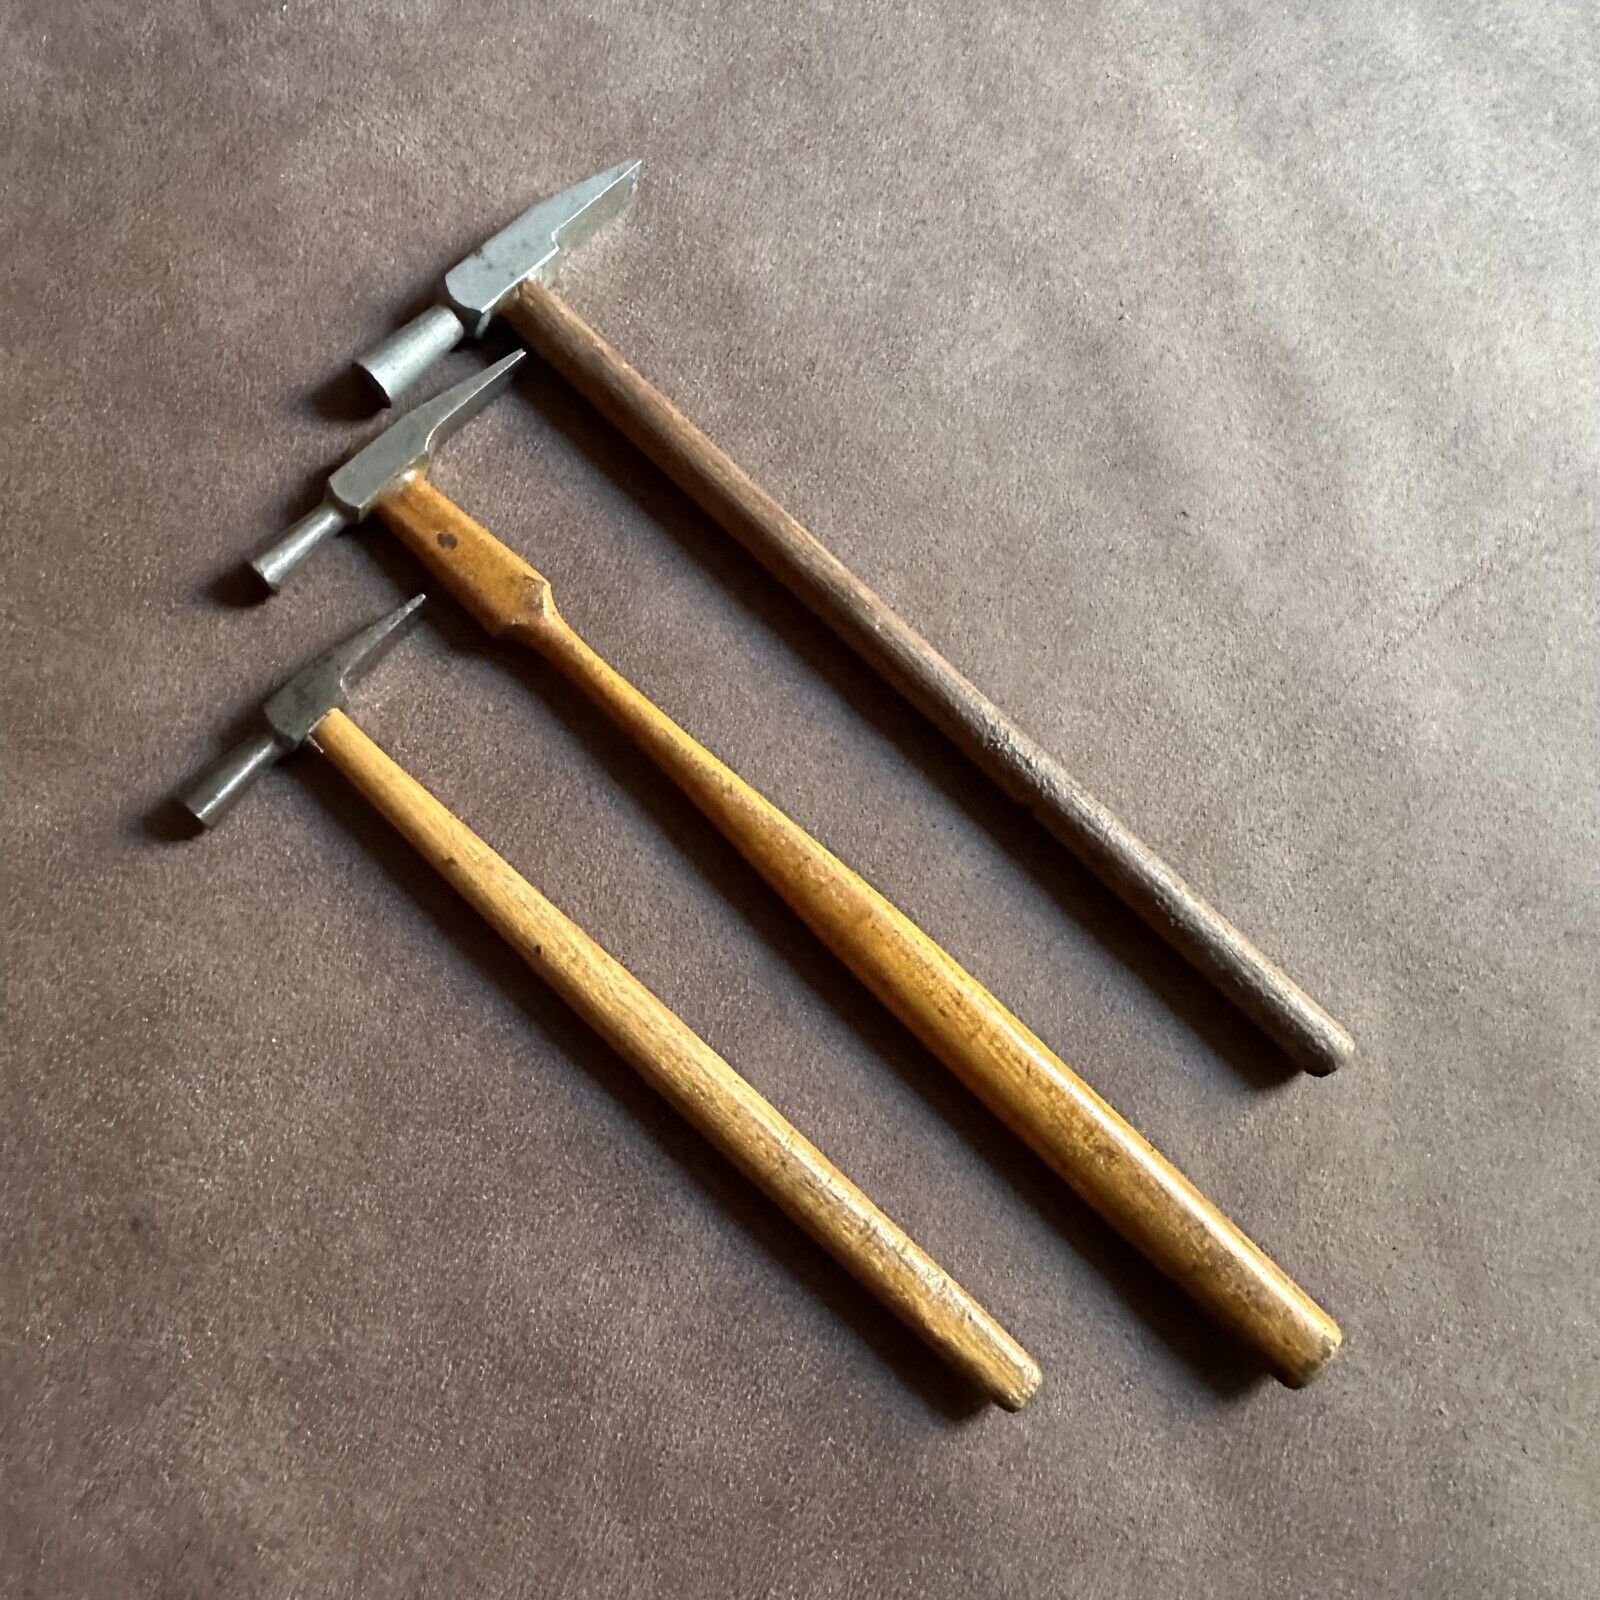 3x VINTAGE UNMARKED WATCHMAKERS JEWELLERS SILVERSMITHS HAMMERS HAND TOOLS